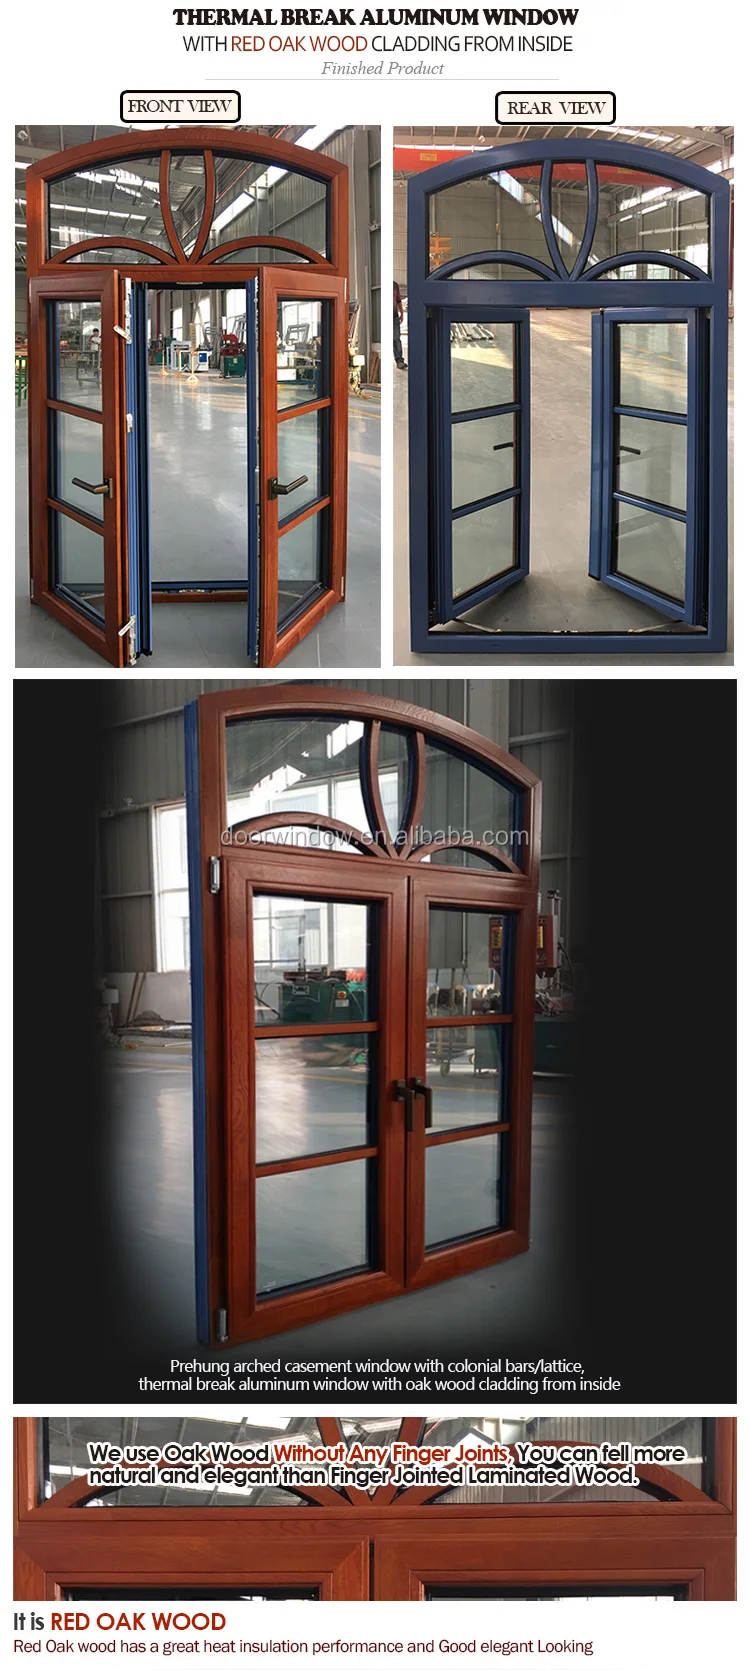 New hot selling products awning windows Australia standard window with thermal break Aluminum profile net screen